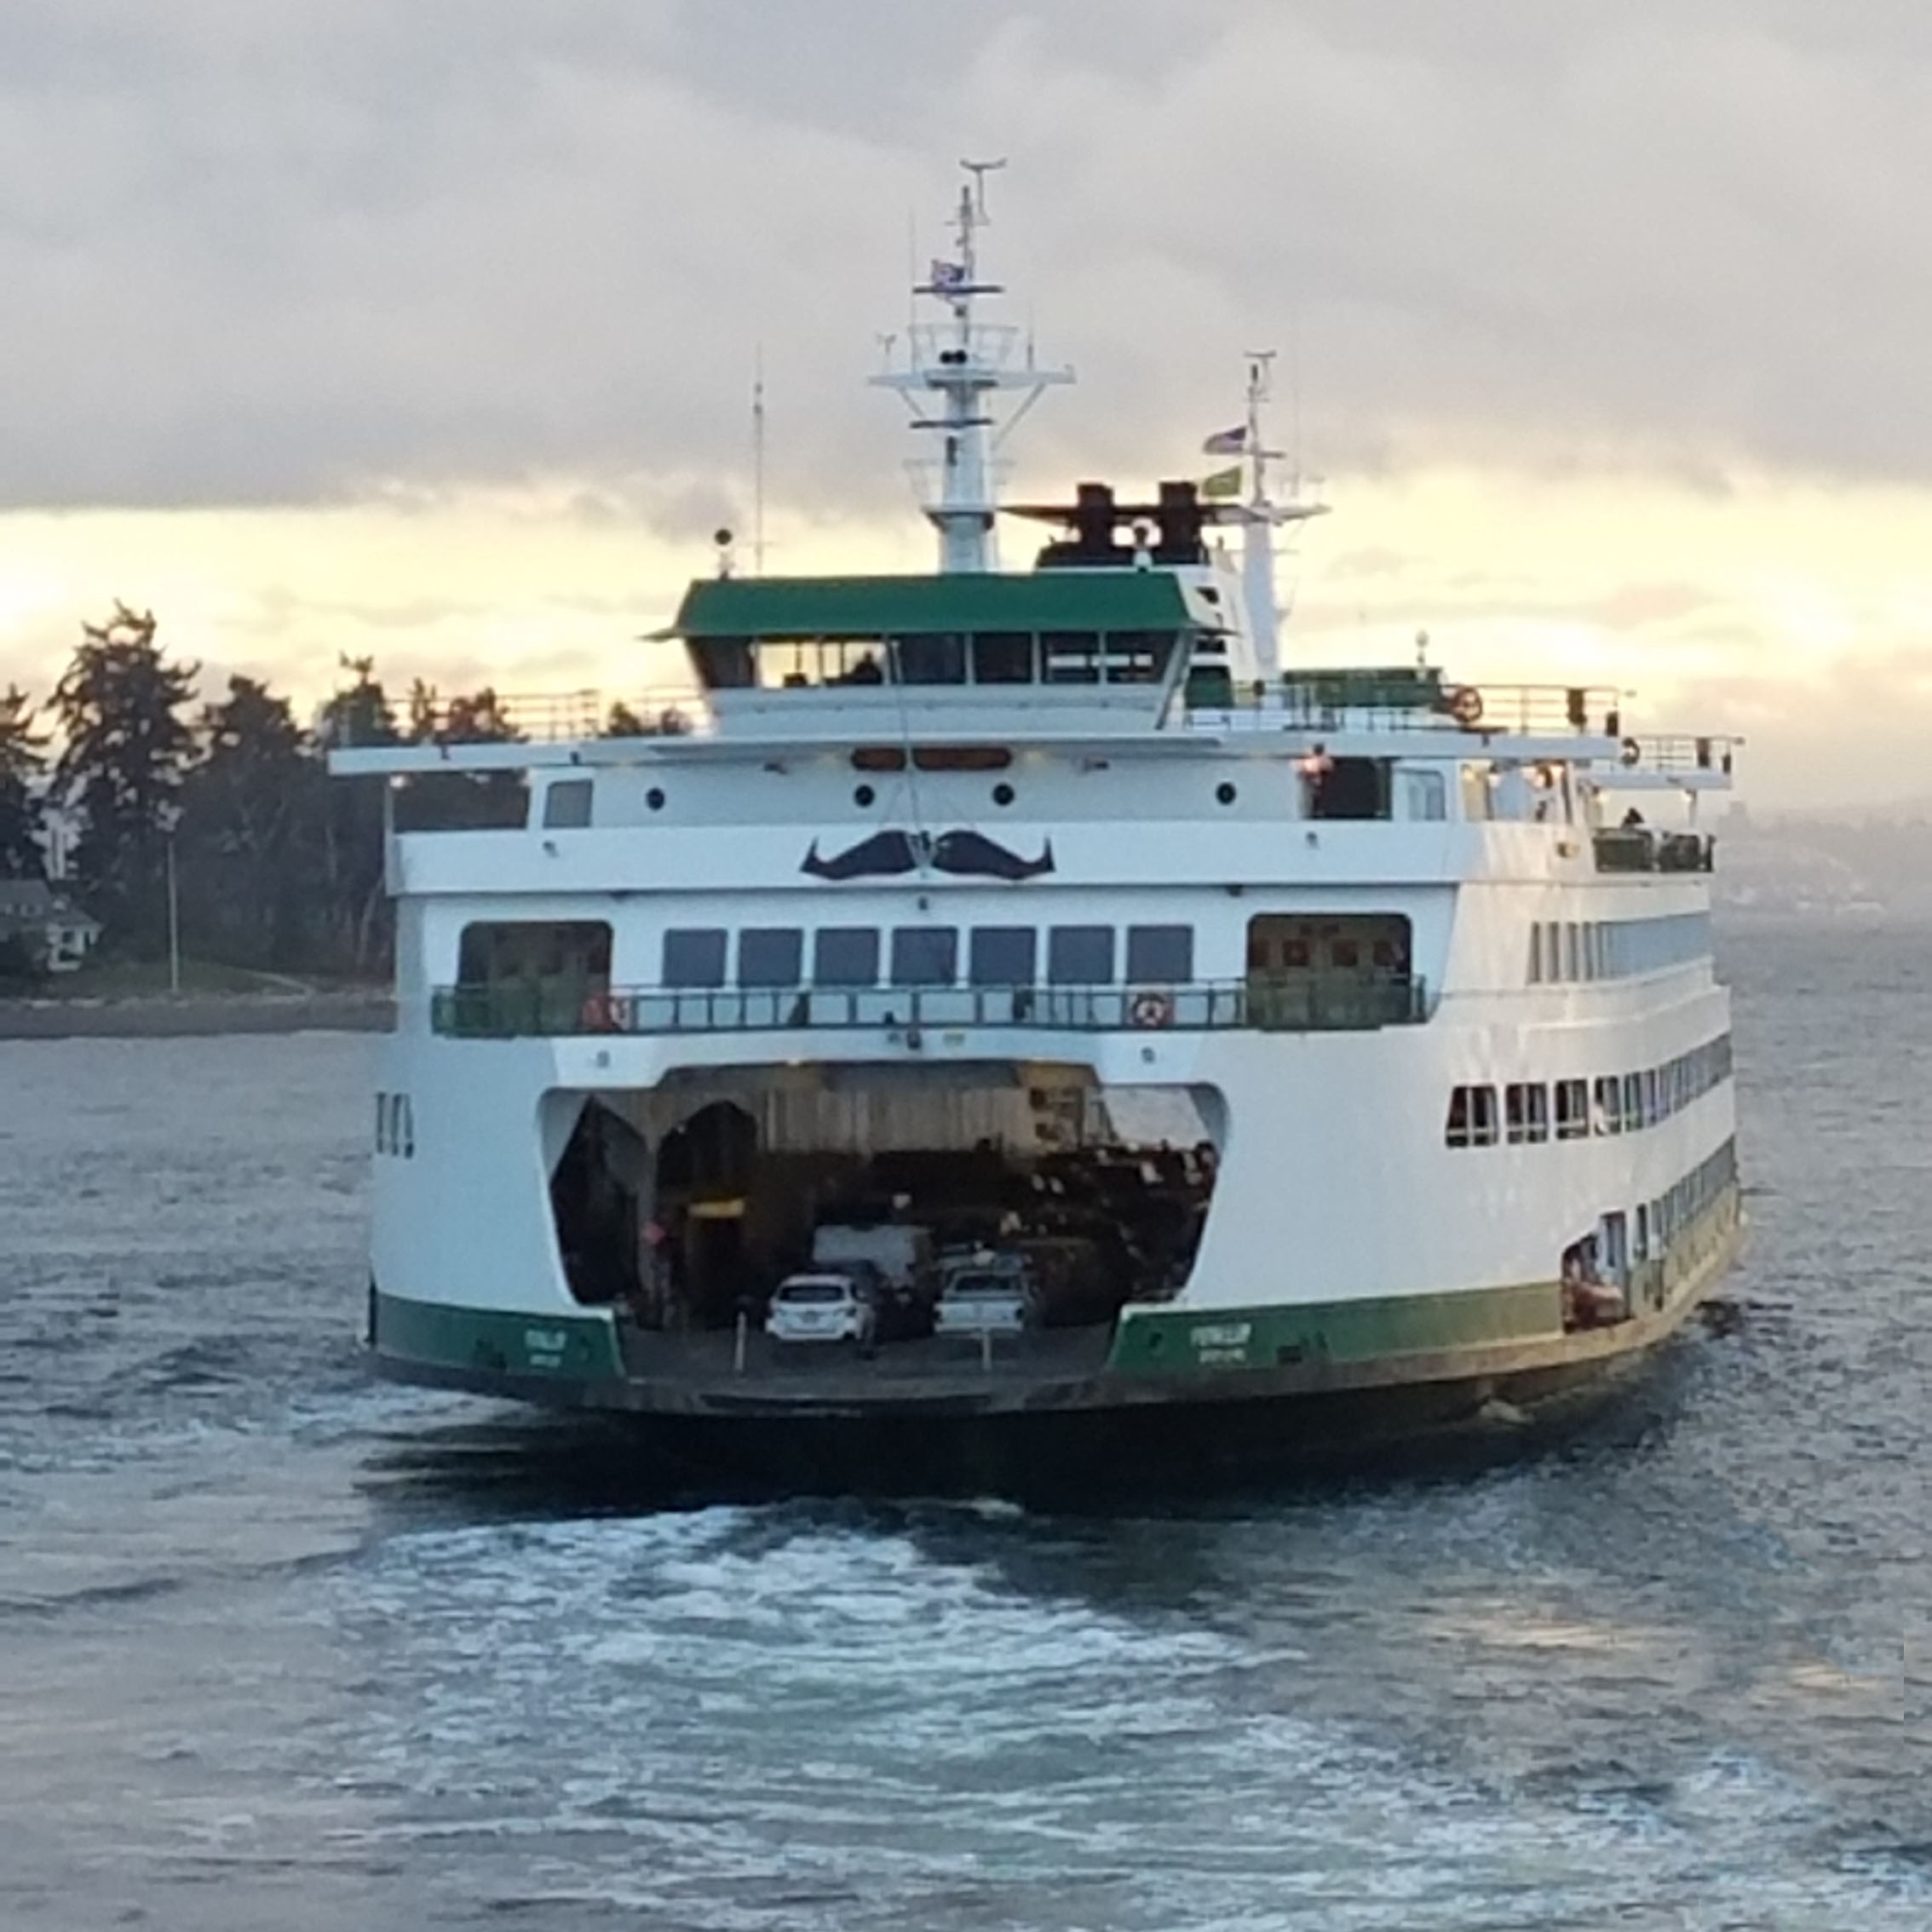 Seattle Ferries 2017 MoMents